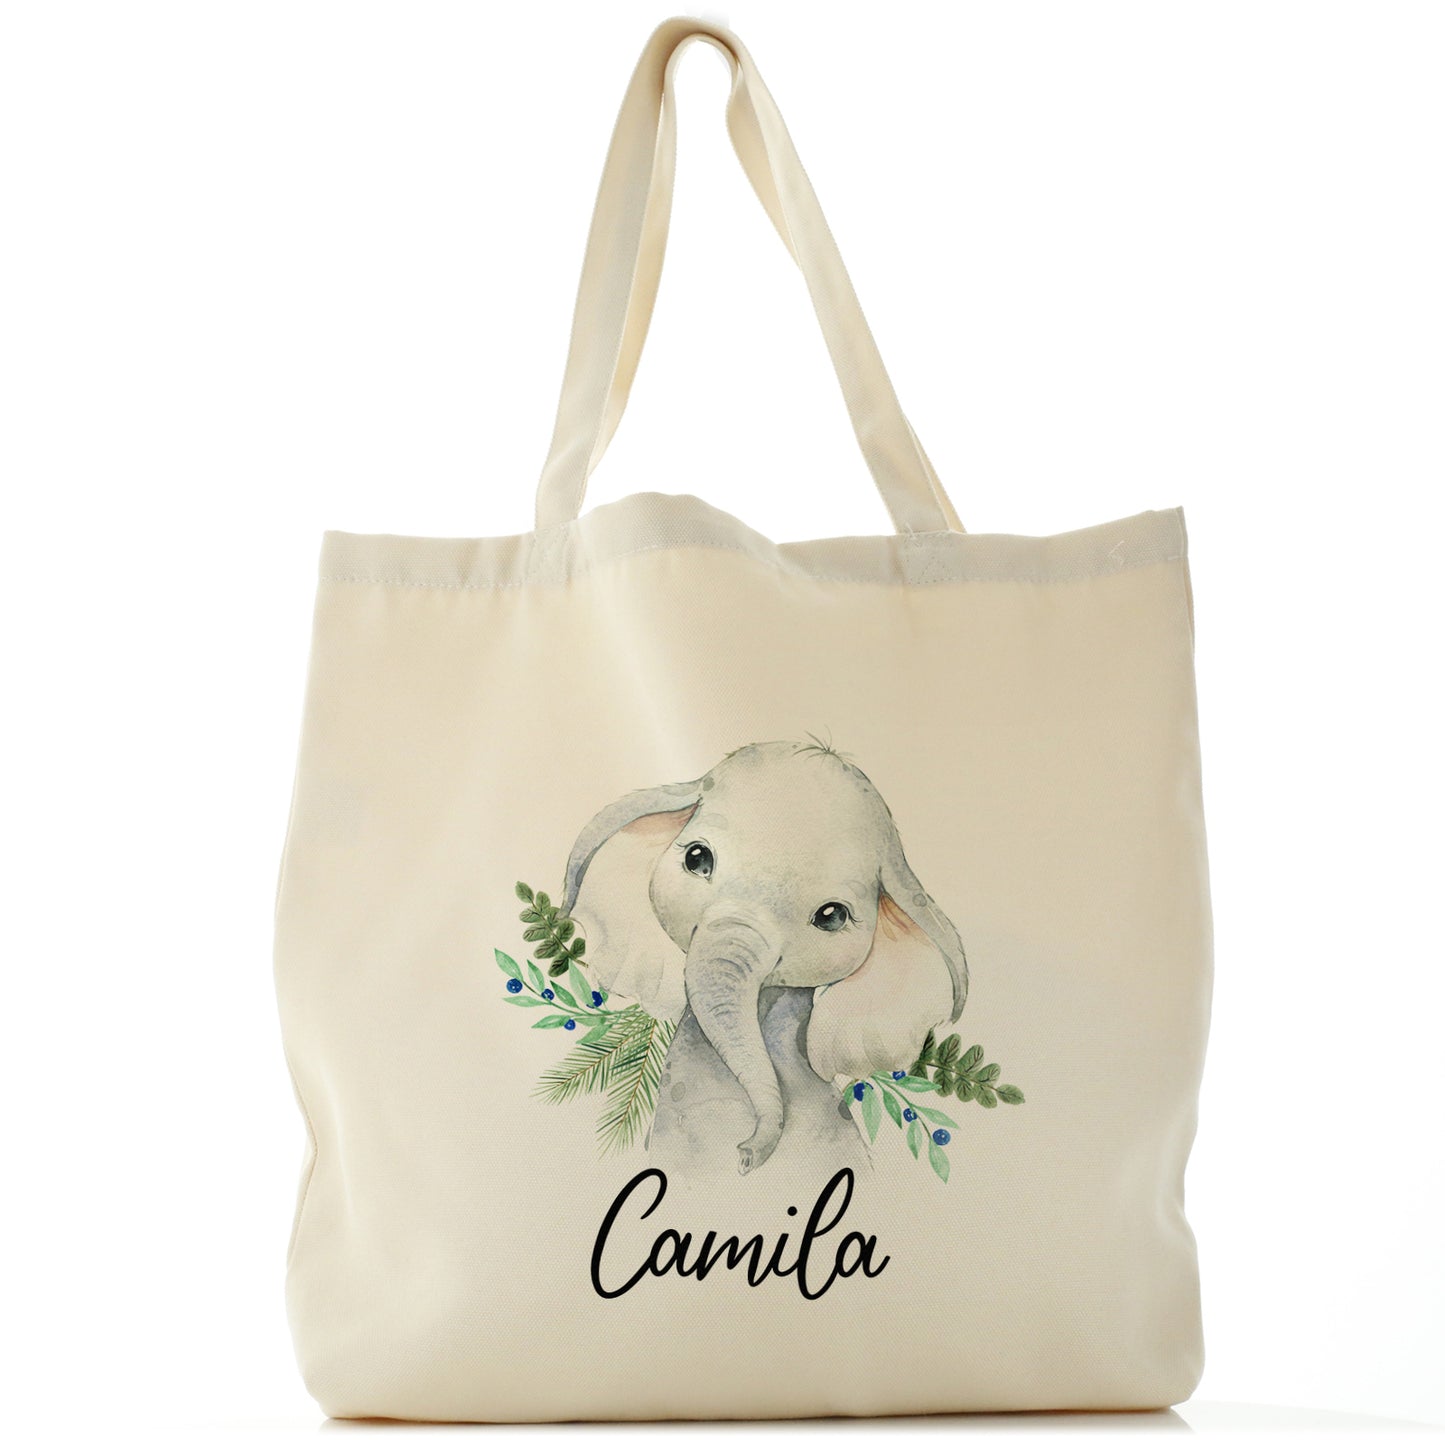 Personalised Canvas Tote Bag with Elephant Blue Berries and Cute Text